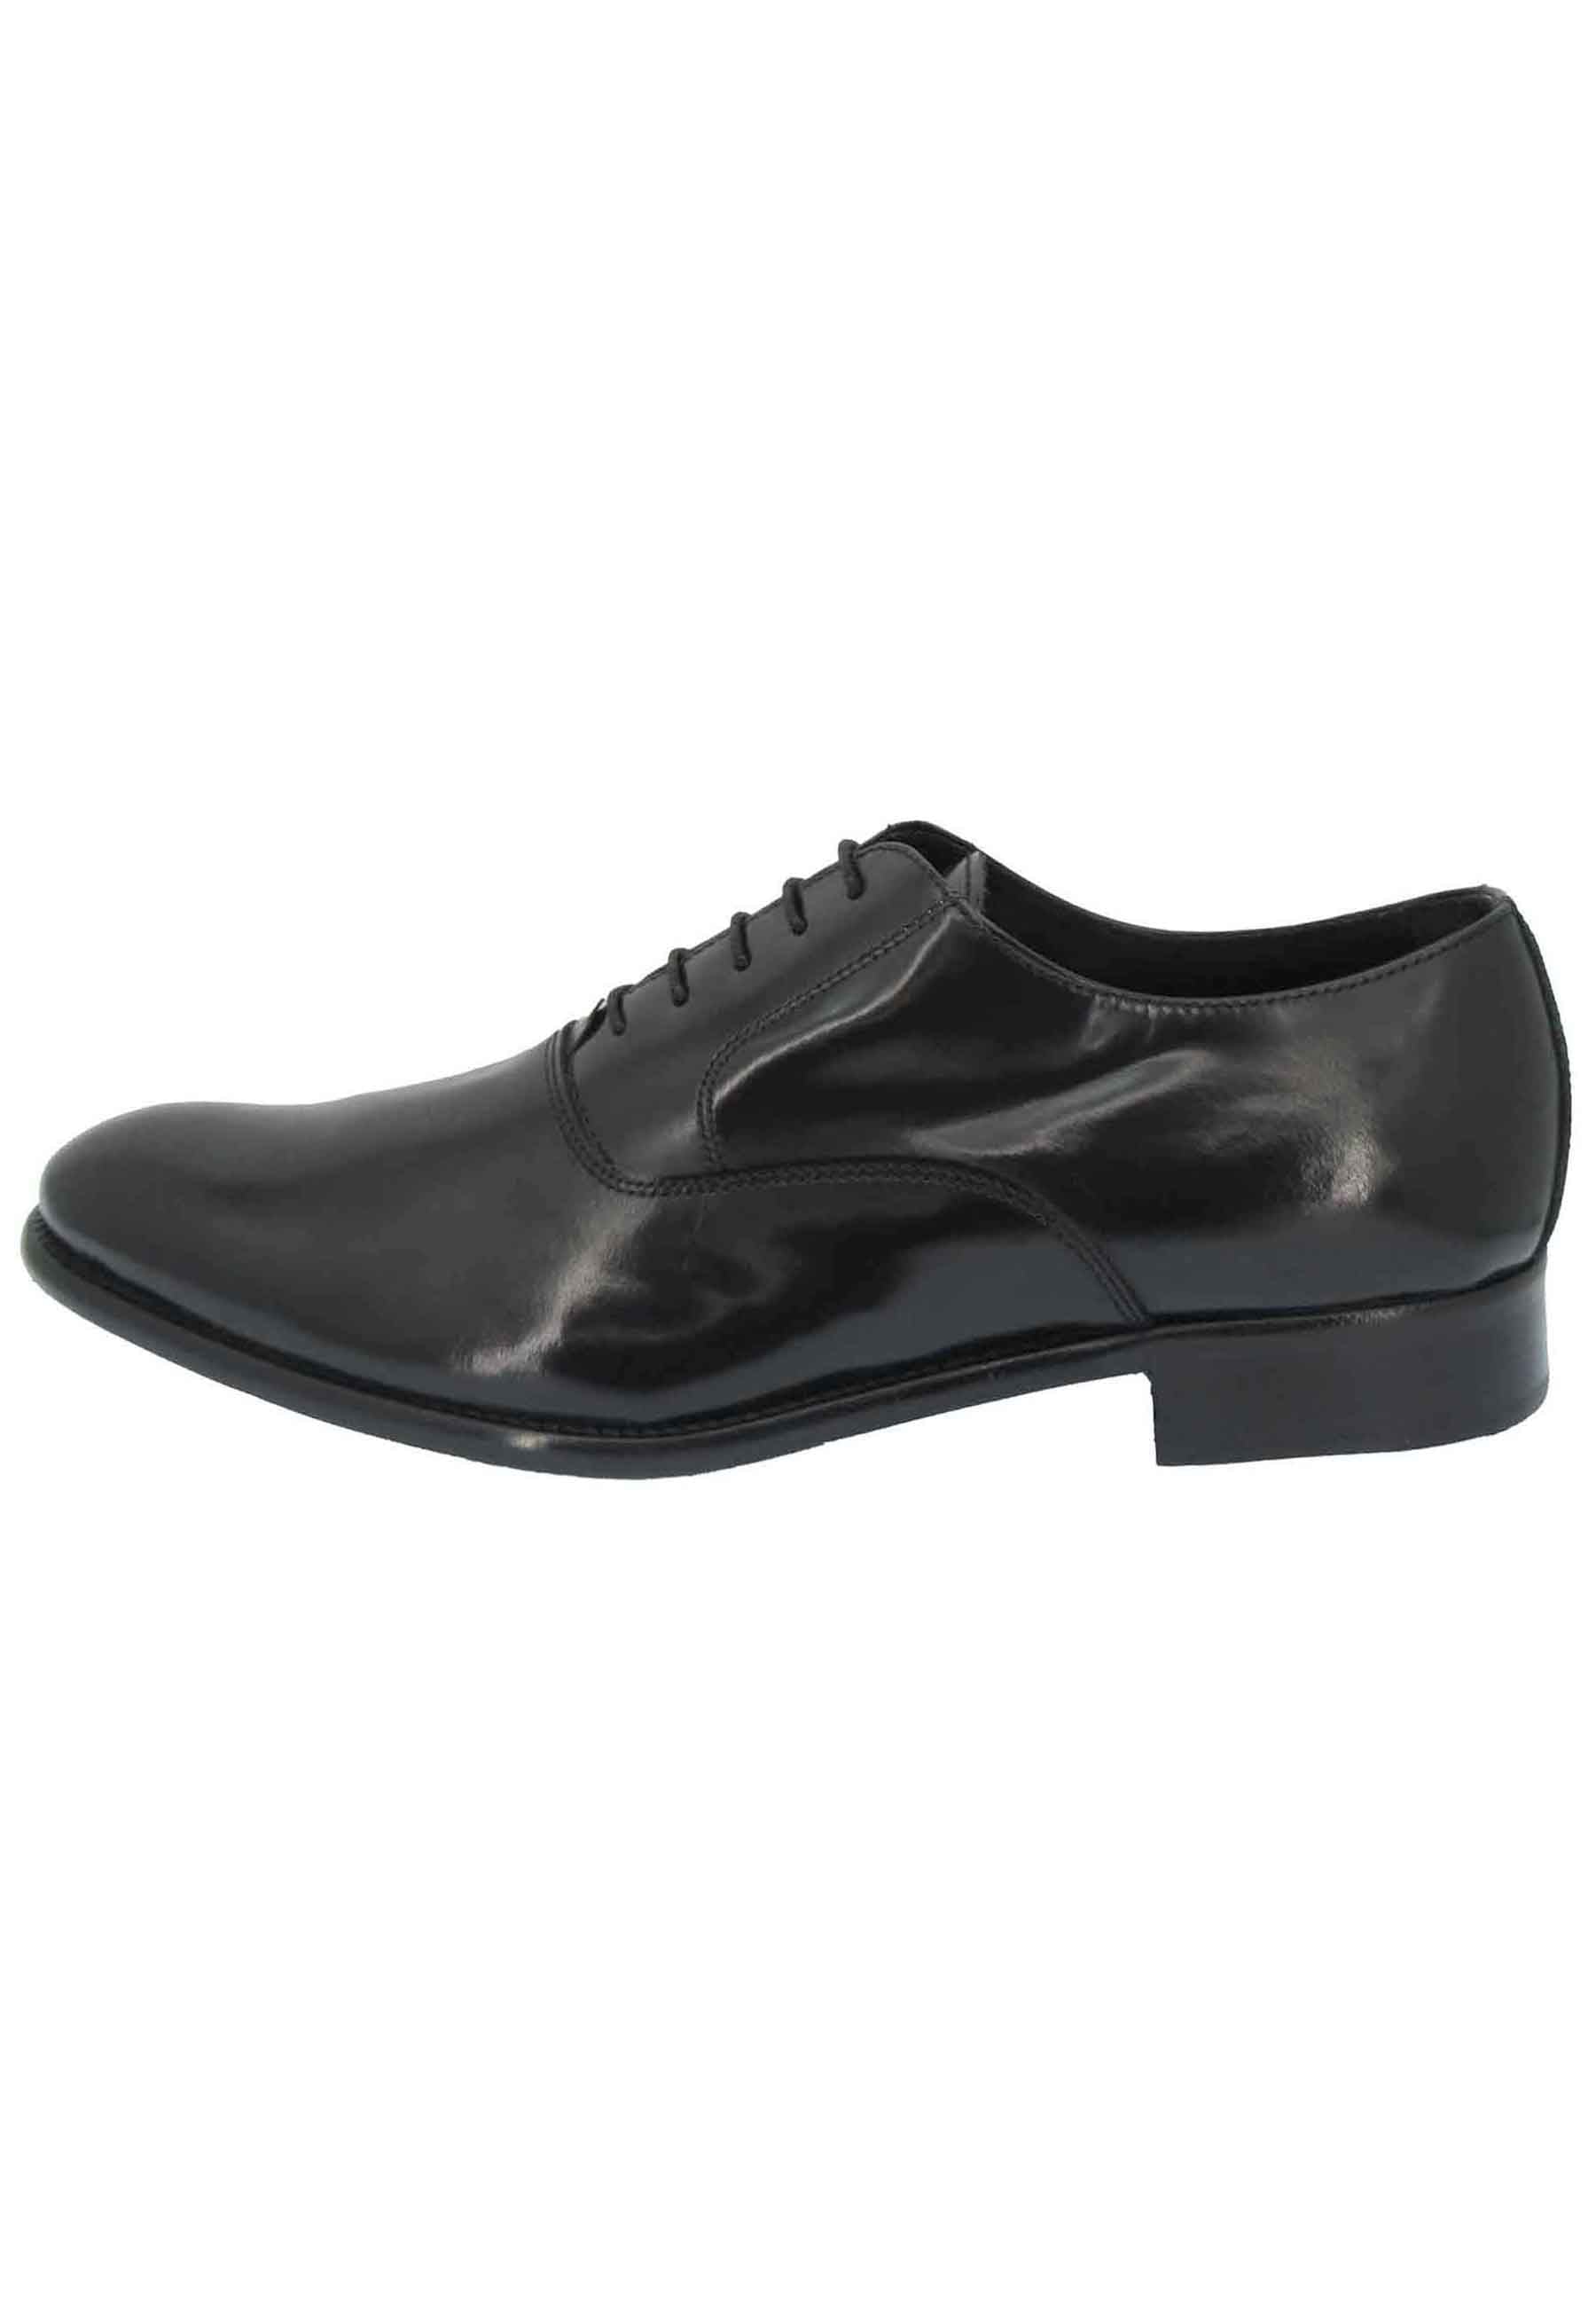 Men's lace-ups in shiny black leather with leather sole